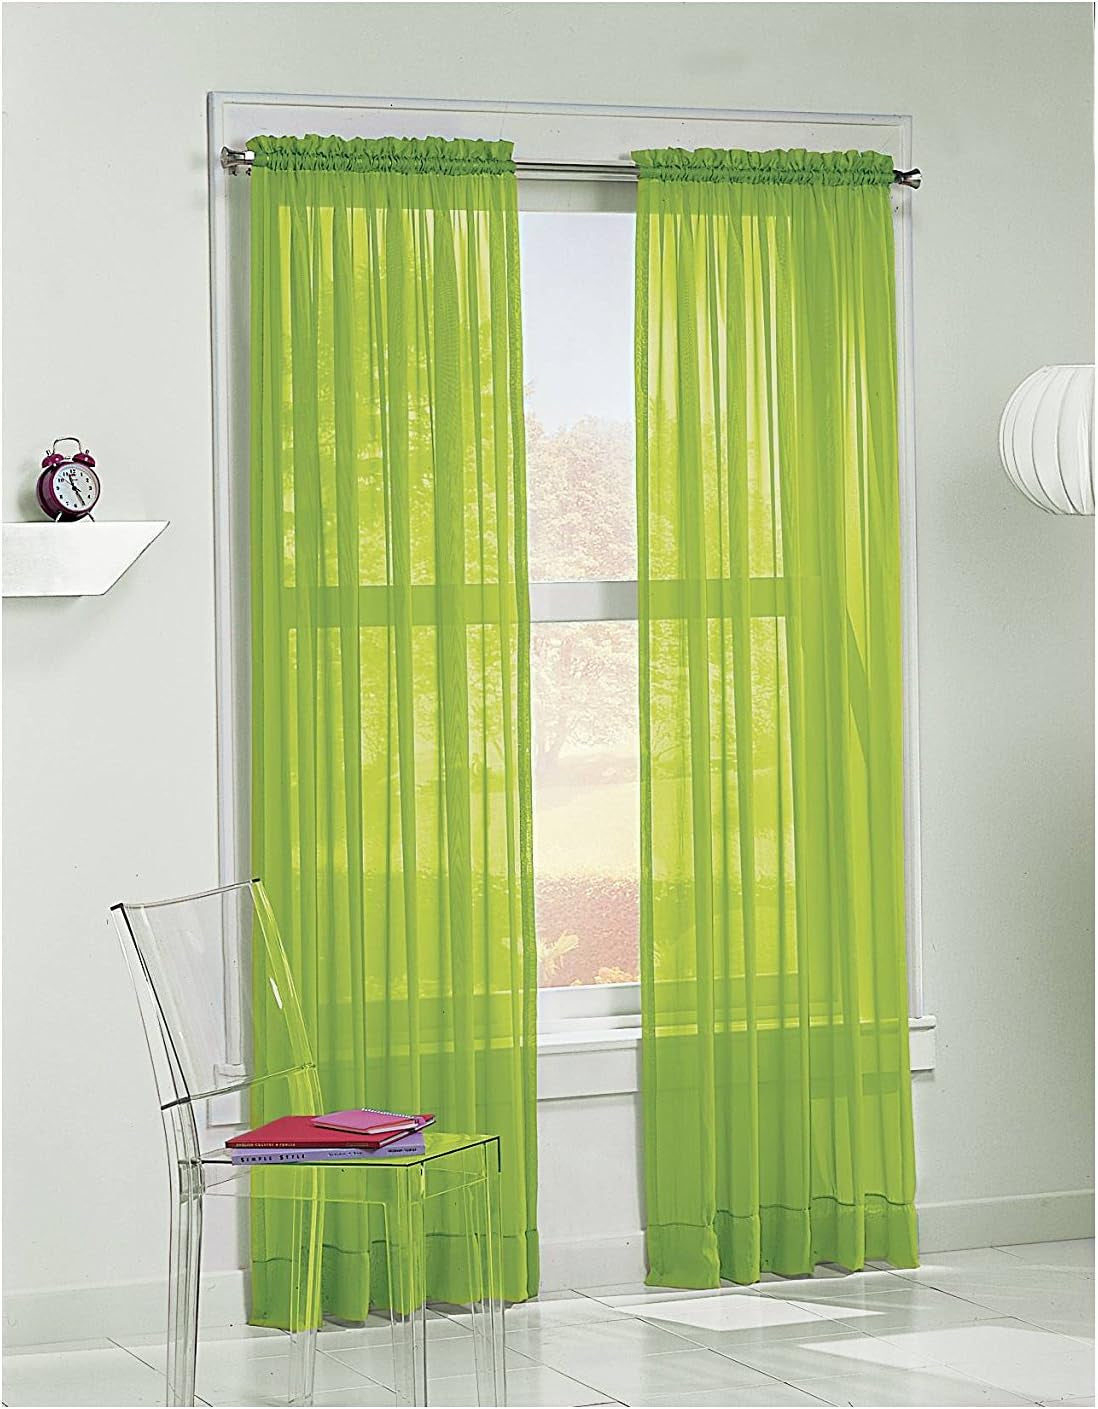 Empire Home Fashion Elegance (2) Panels Sheer Window Curtains Drapes Set 84" Long Rod Pocket Solid (Red)  Empire Home Fashion Lime Green  